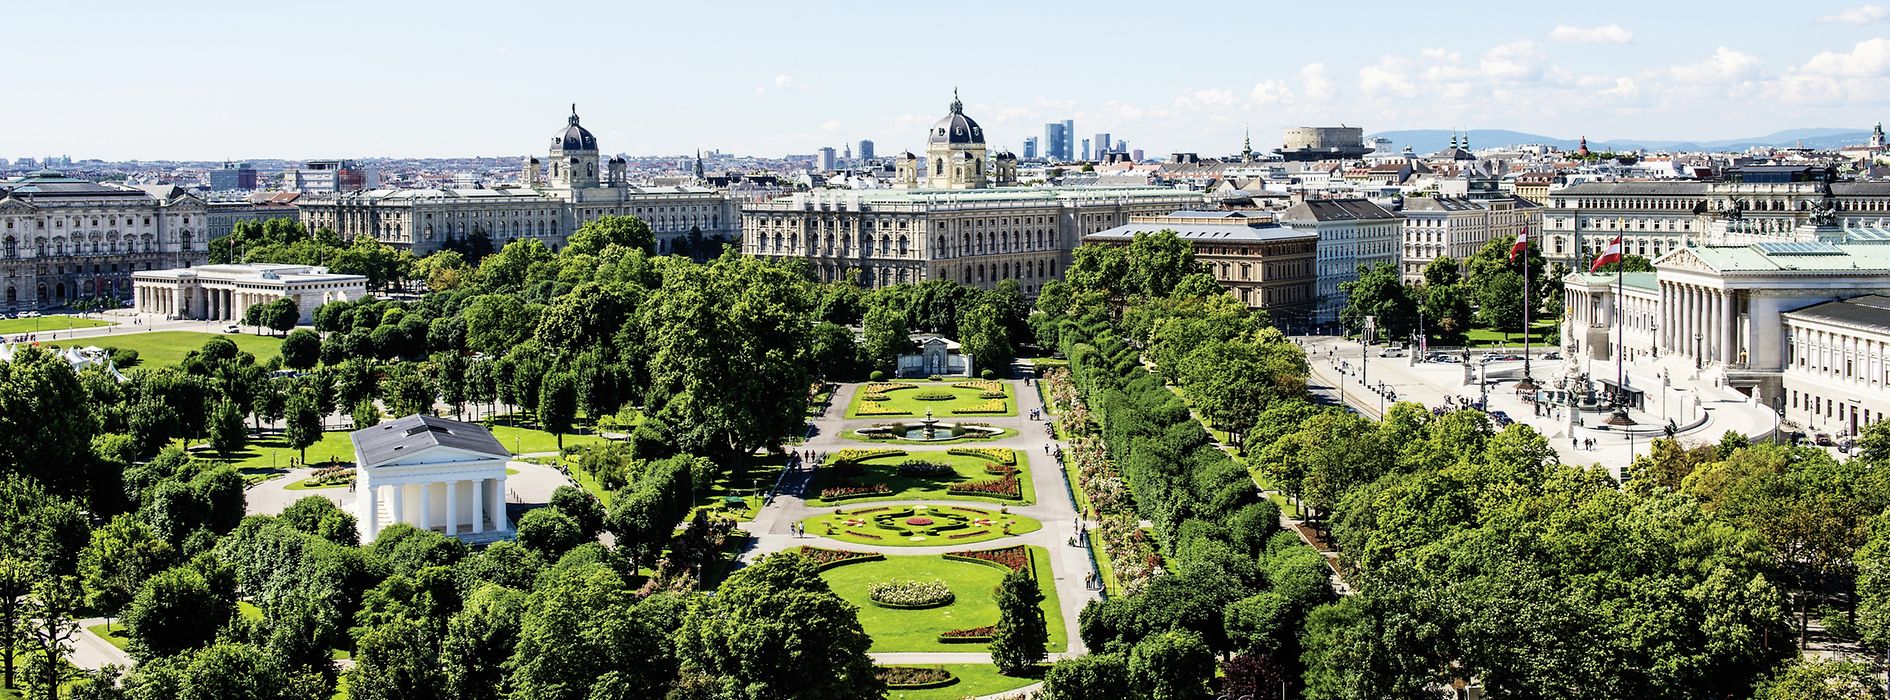 View of the Volksgarten and Parliament at the Ringstrasse in Vienna